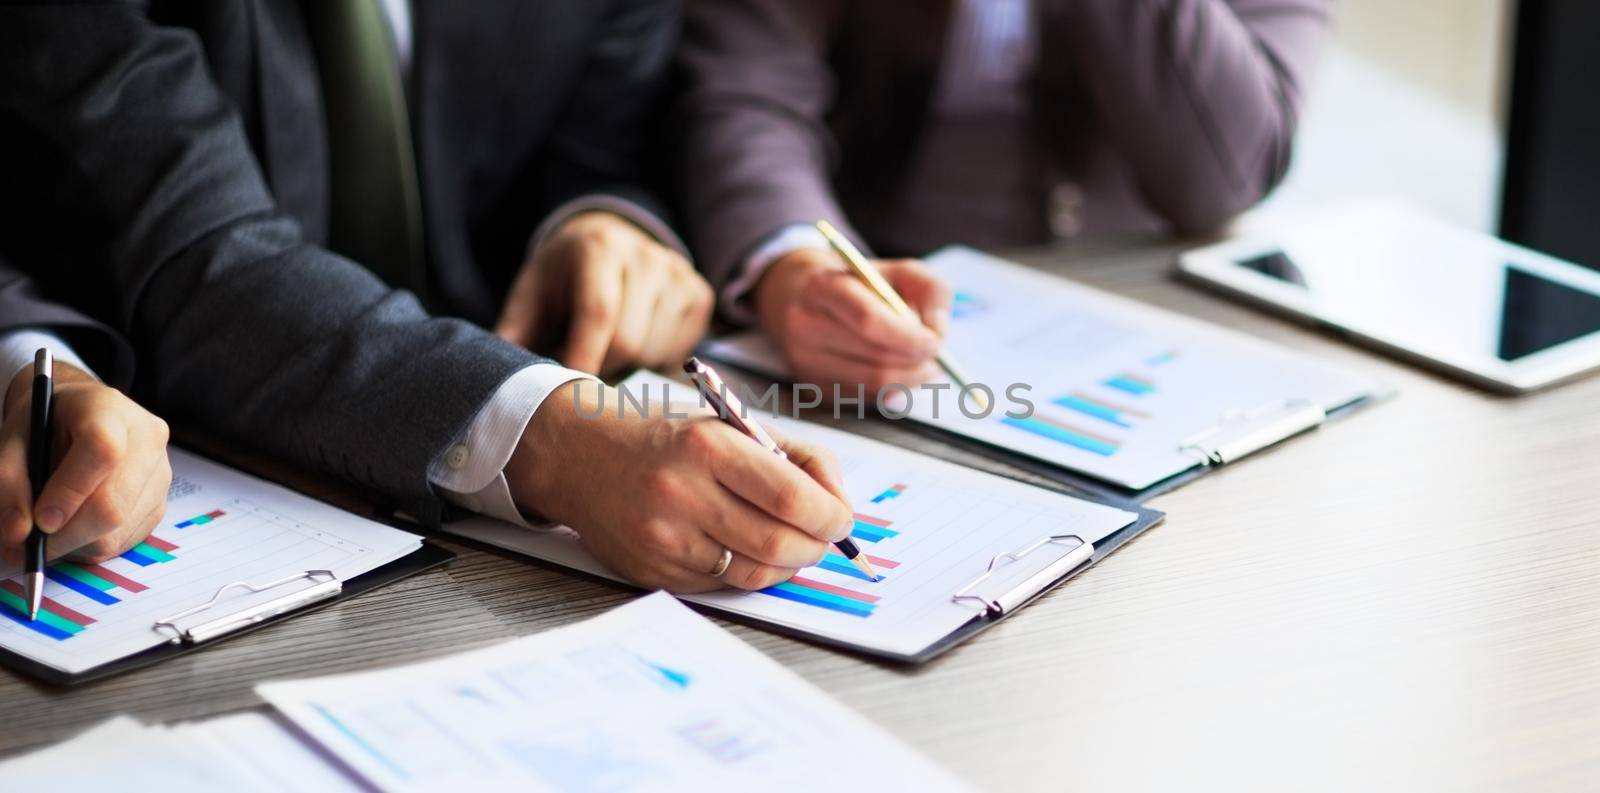 Banking business or financial analyst desktop accounting charts, pens indicates graphics by SmartPhotoLab